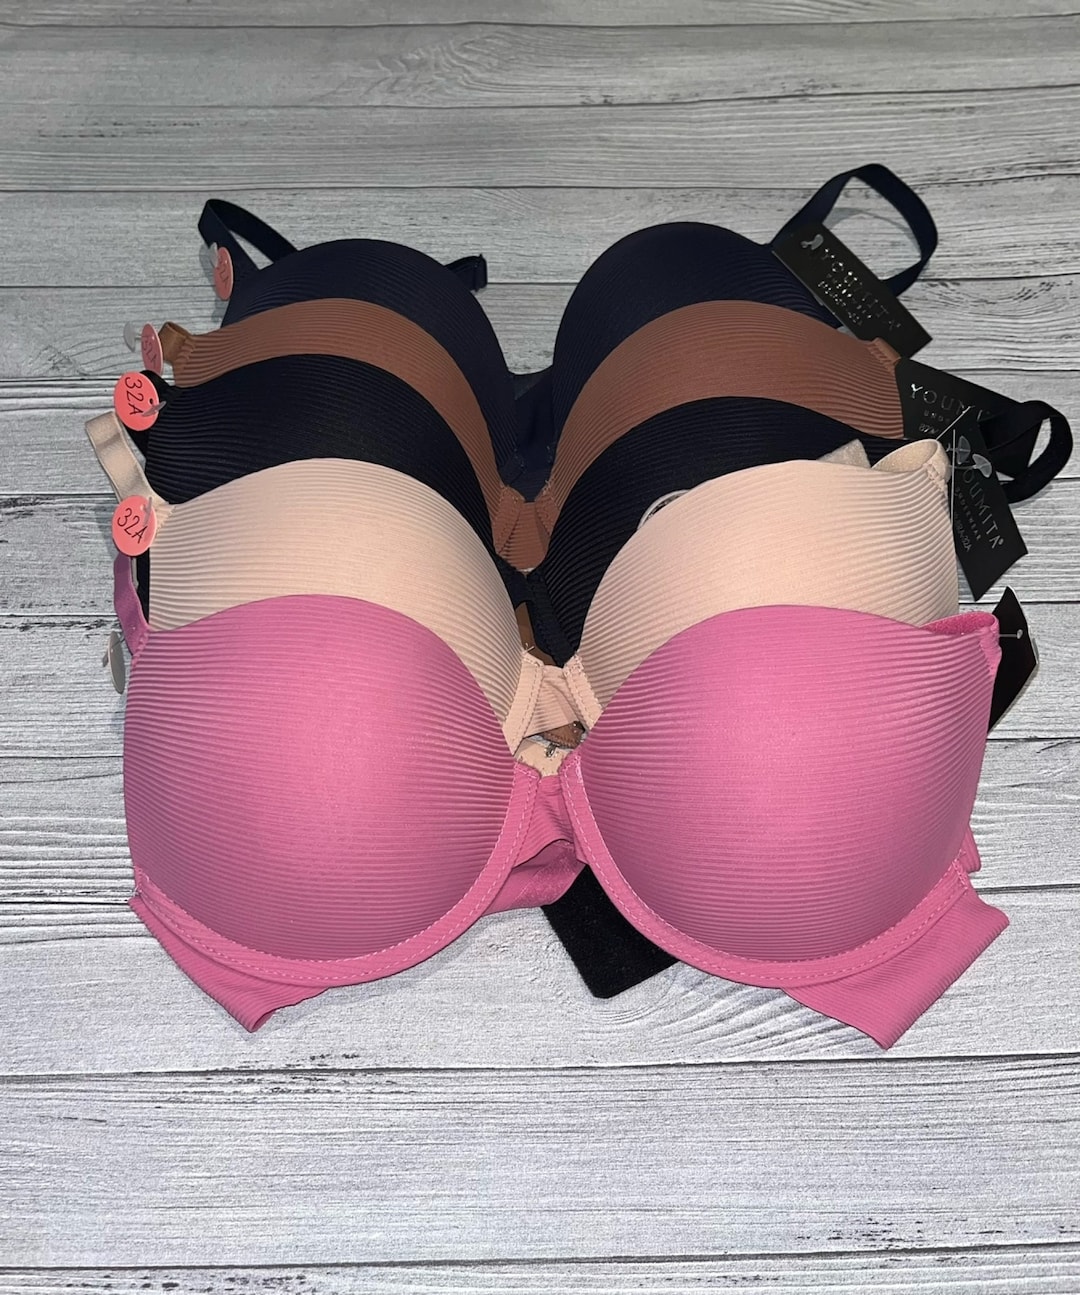 32A Women Lined Super Push up Bra Petite Ladies A CUP Variety